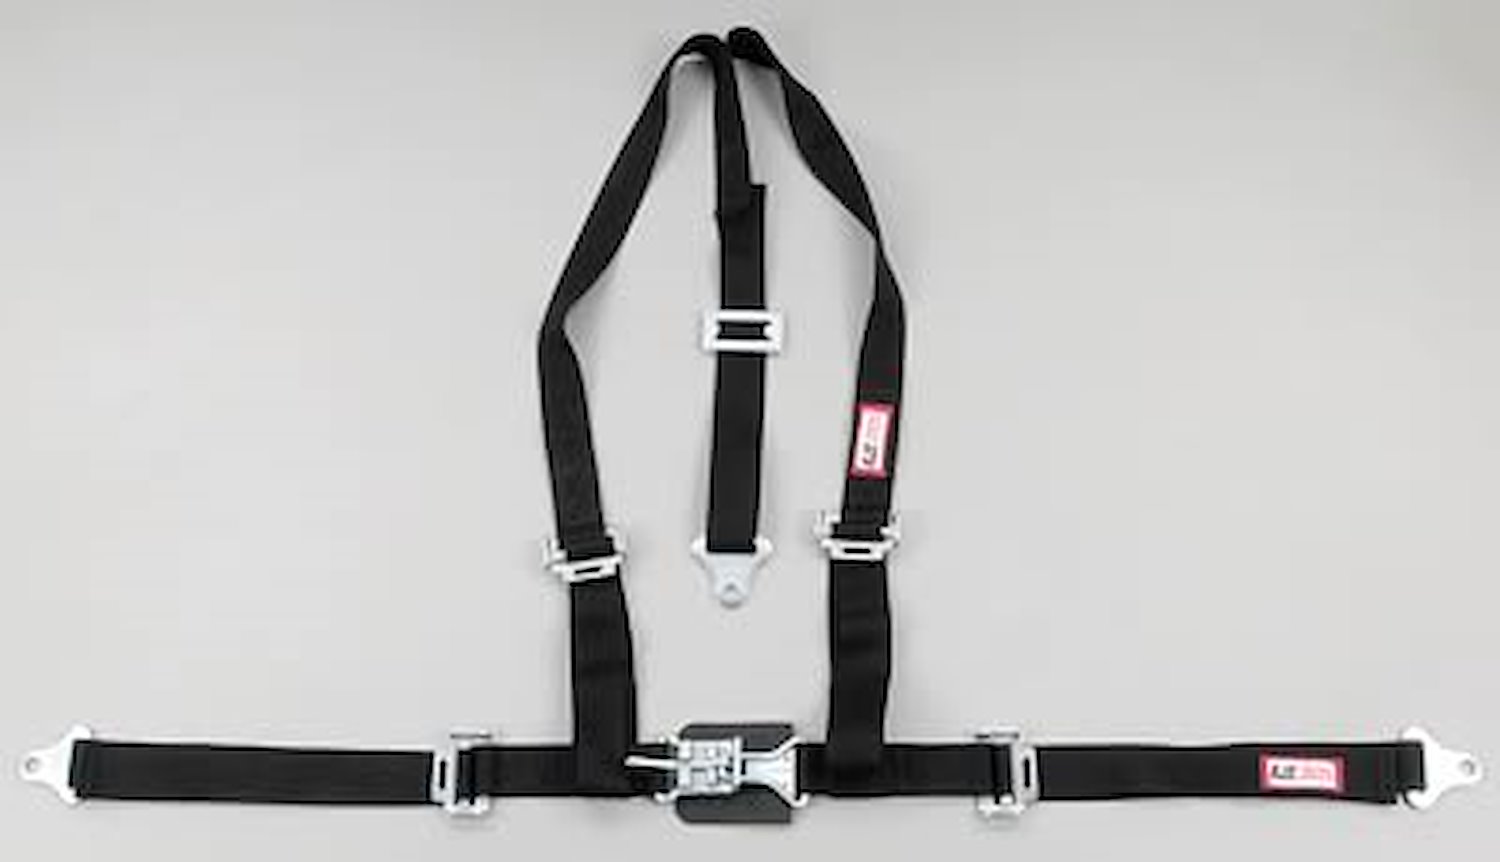 NON-SFI L&L HARNESS 3 PULL UP Lap Belt SNAP SEWN IN 2 Shoulder Harness V ROLL BAR Mount w/STERNUM STRAP BOLT YELLOW